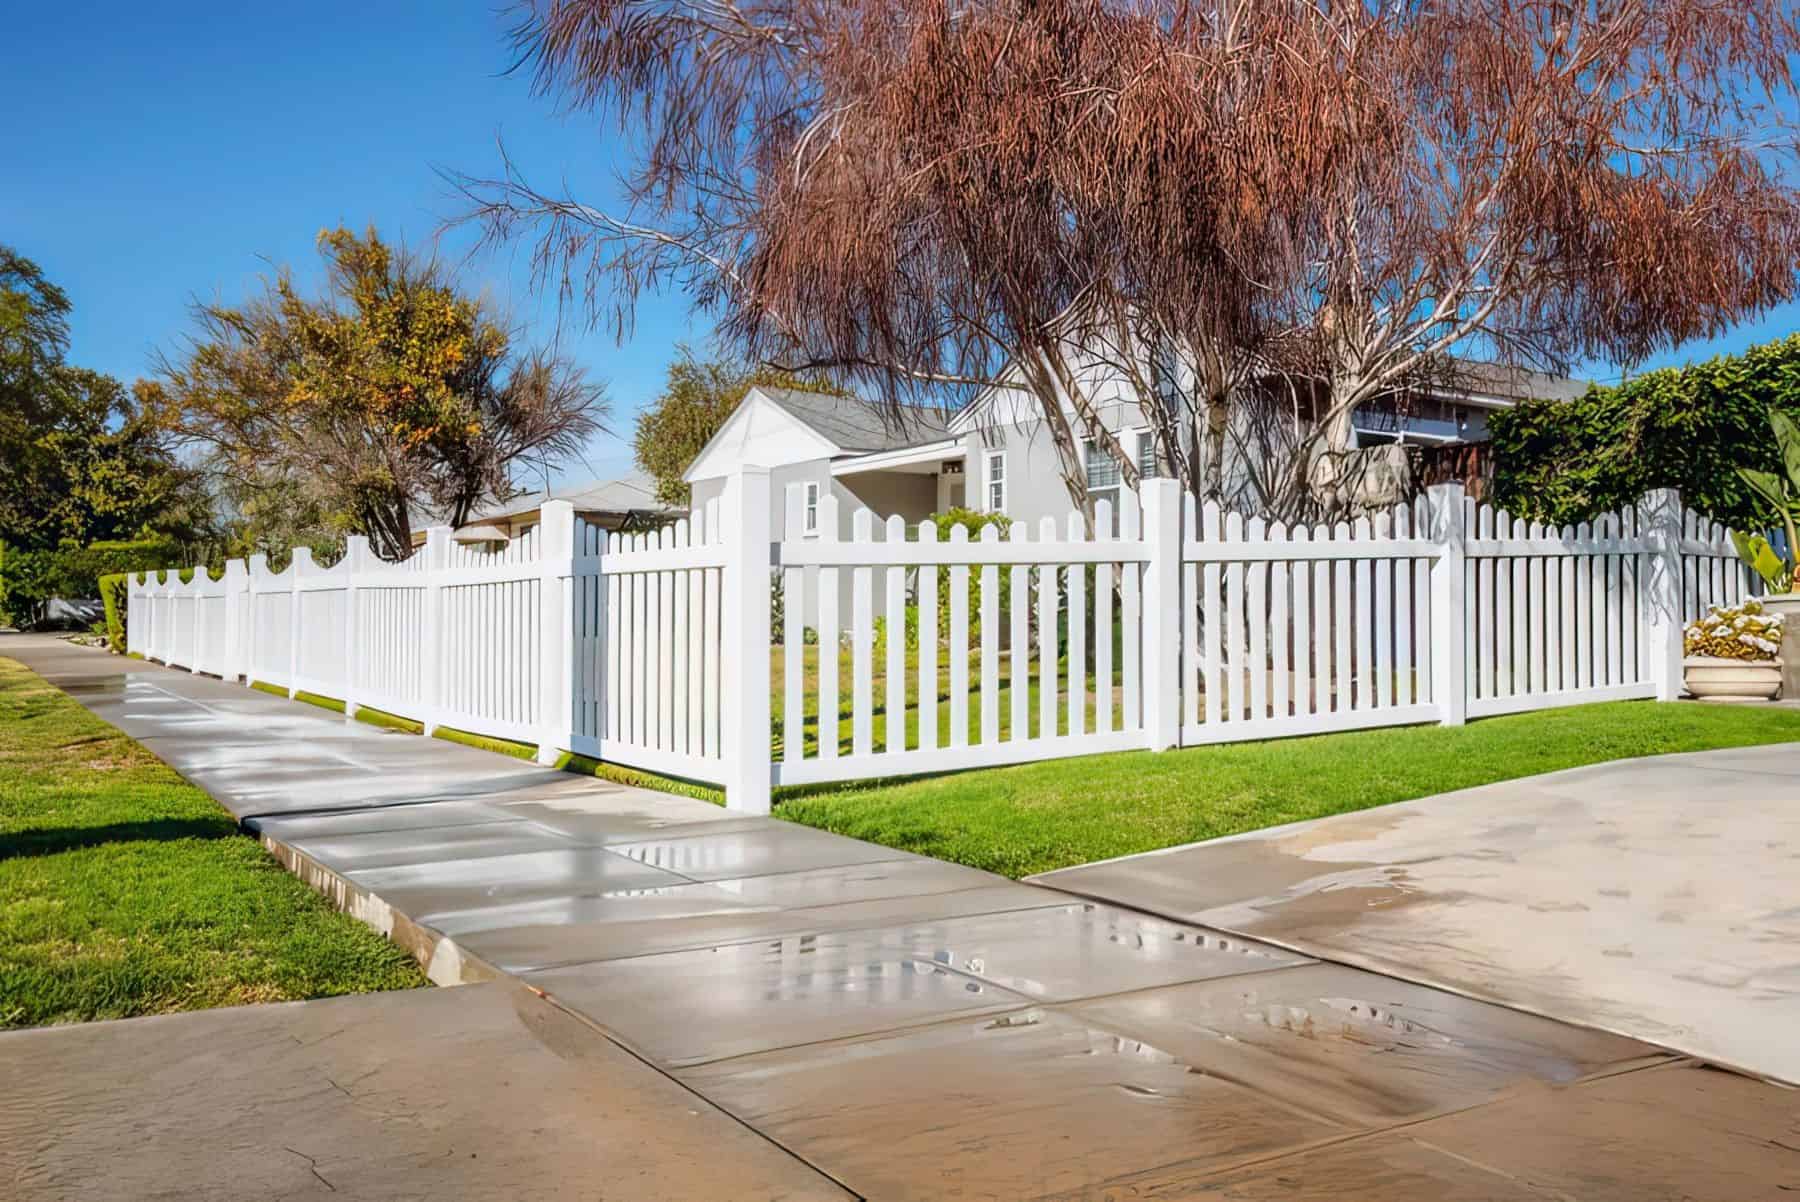 Waist high vinyl picket fence and gate surrounding grassy front lawn with small trees leading into main entrance